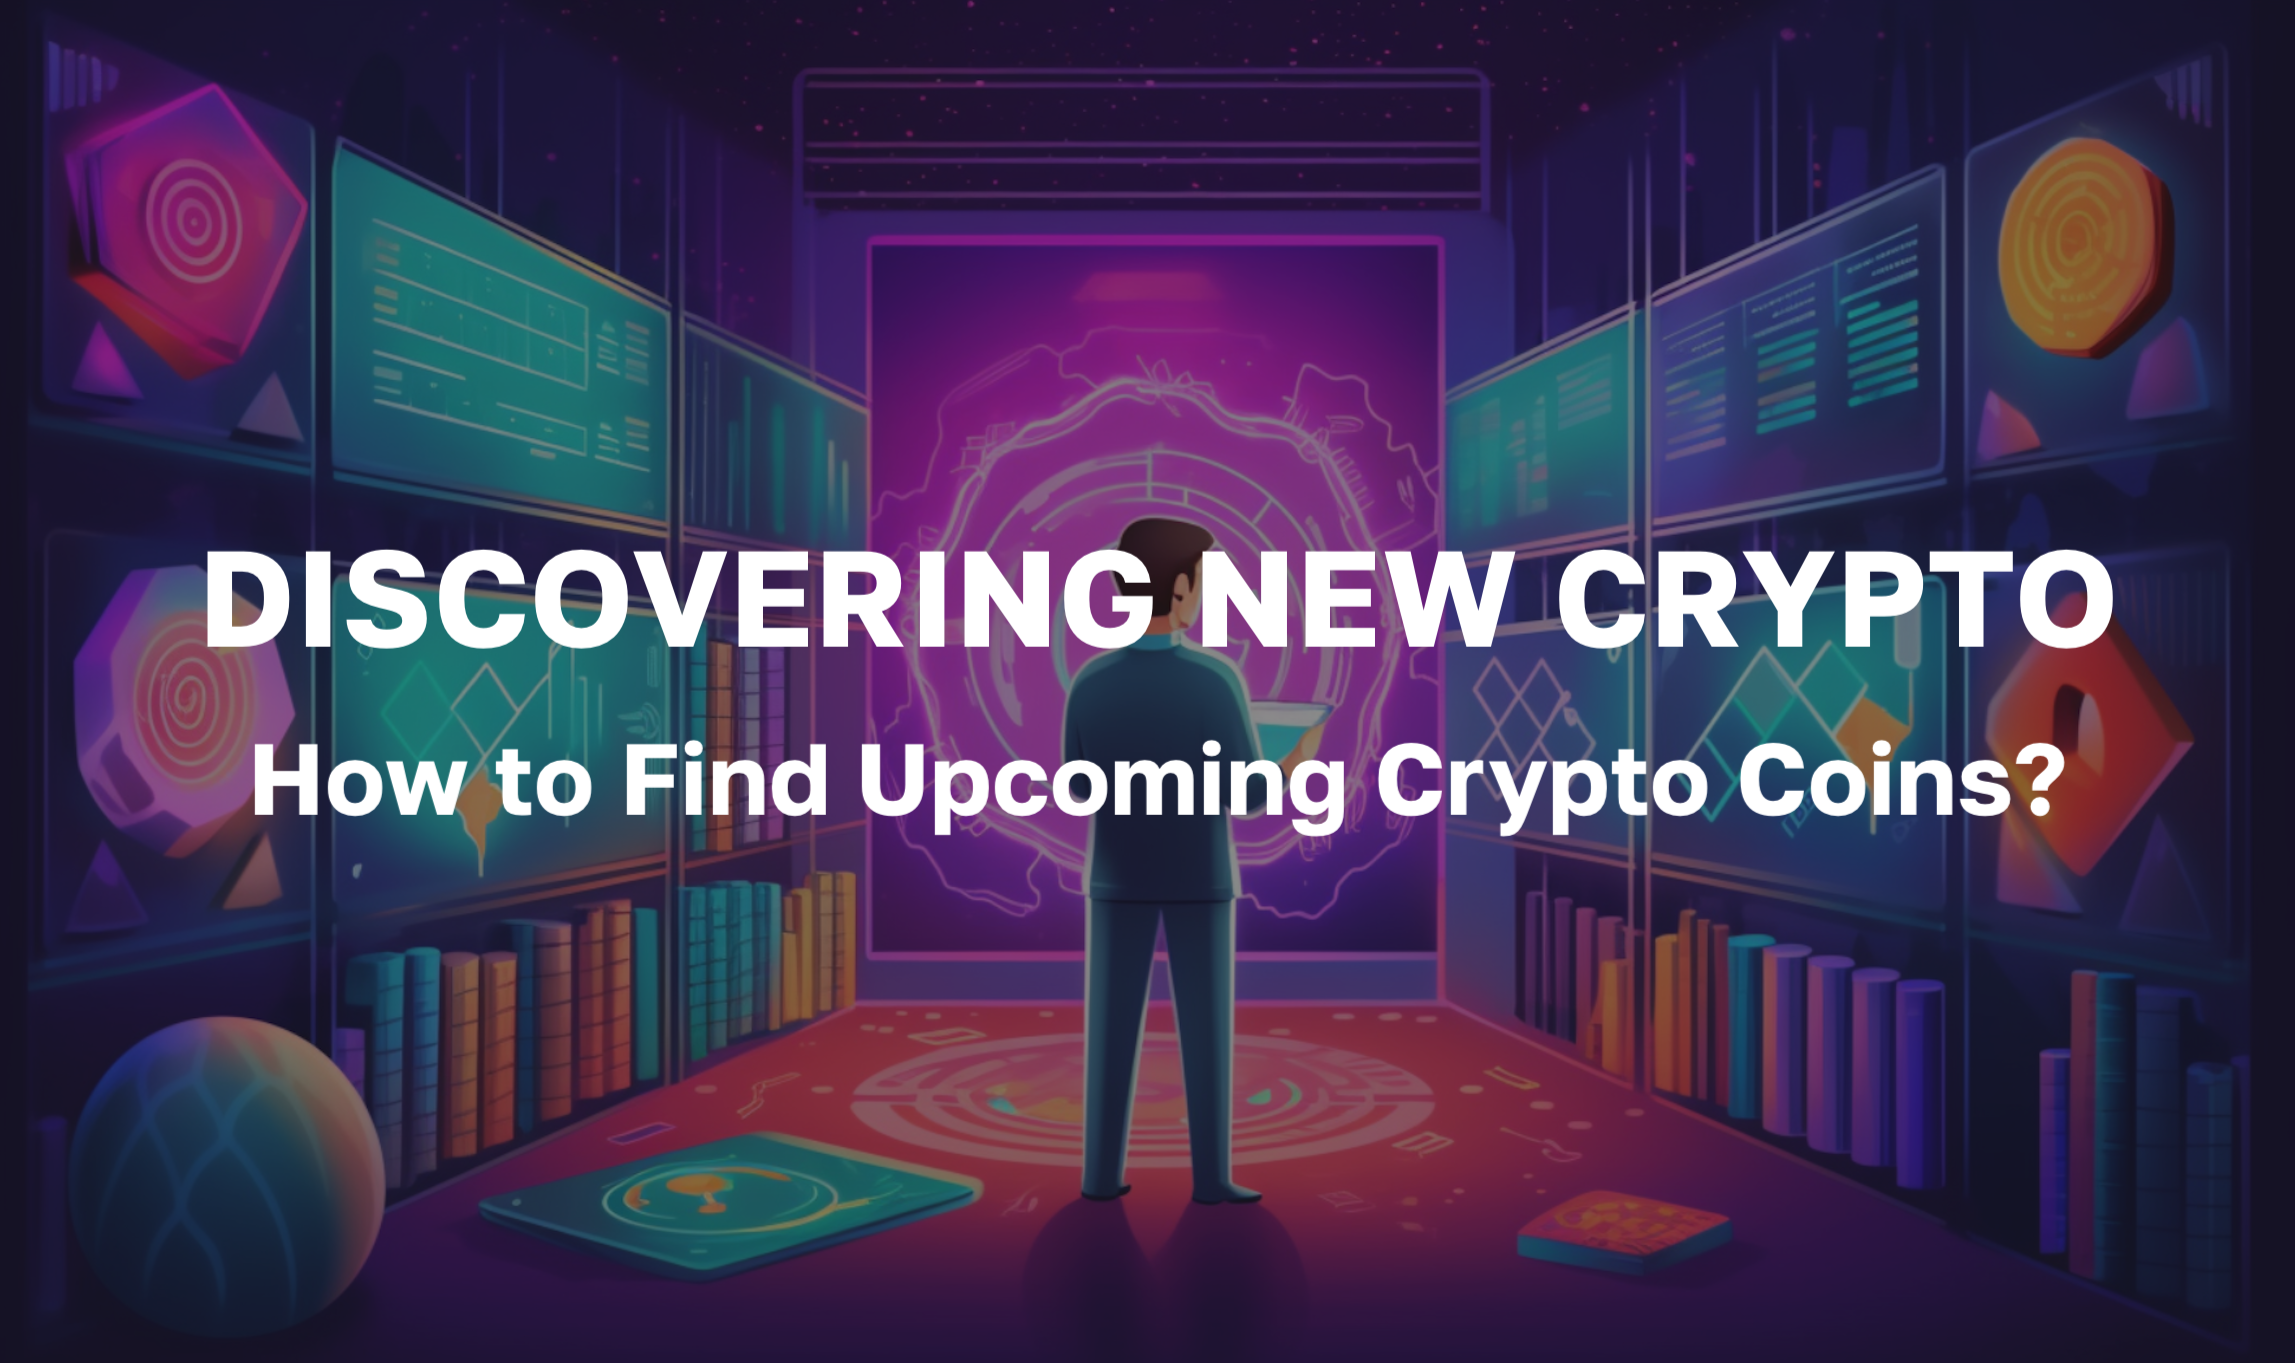 How to Find Upcoming Crypto Coins? Discovering New Crypto Projects